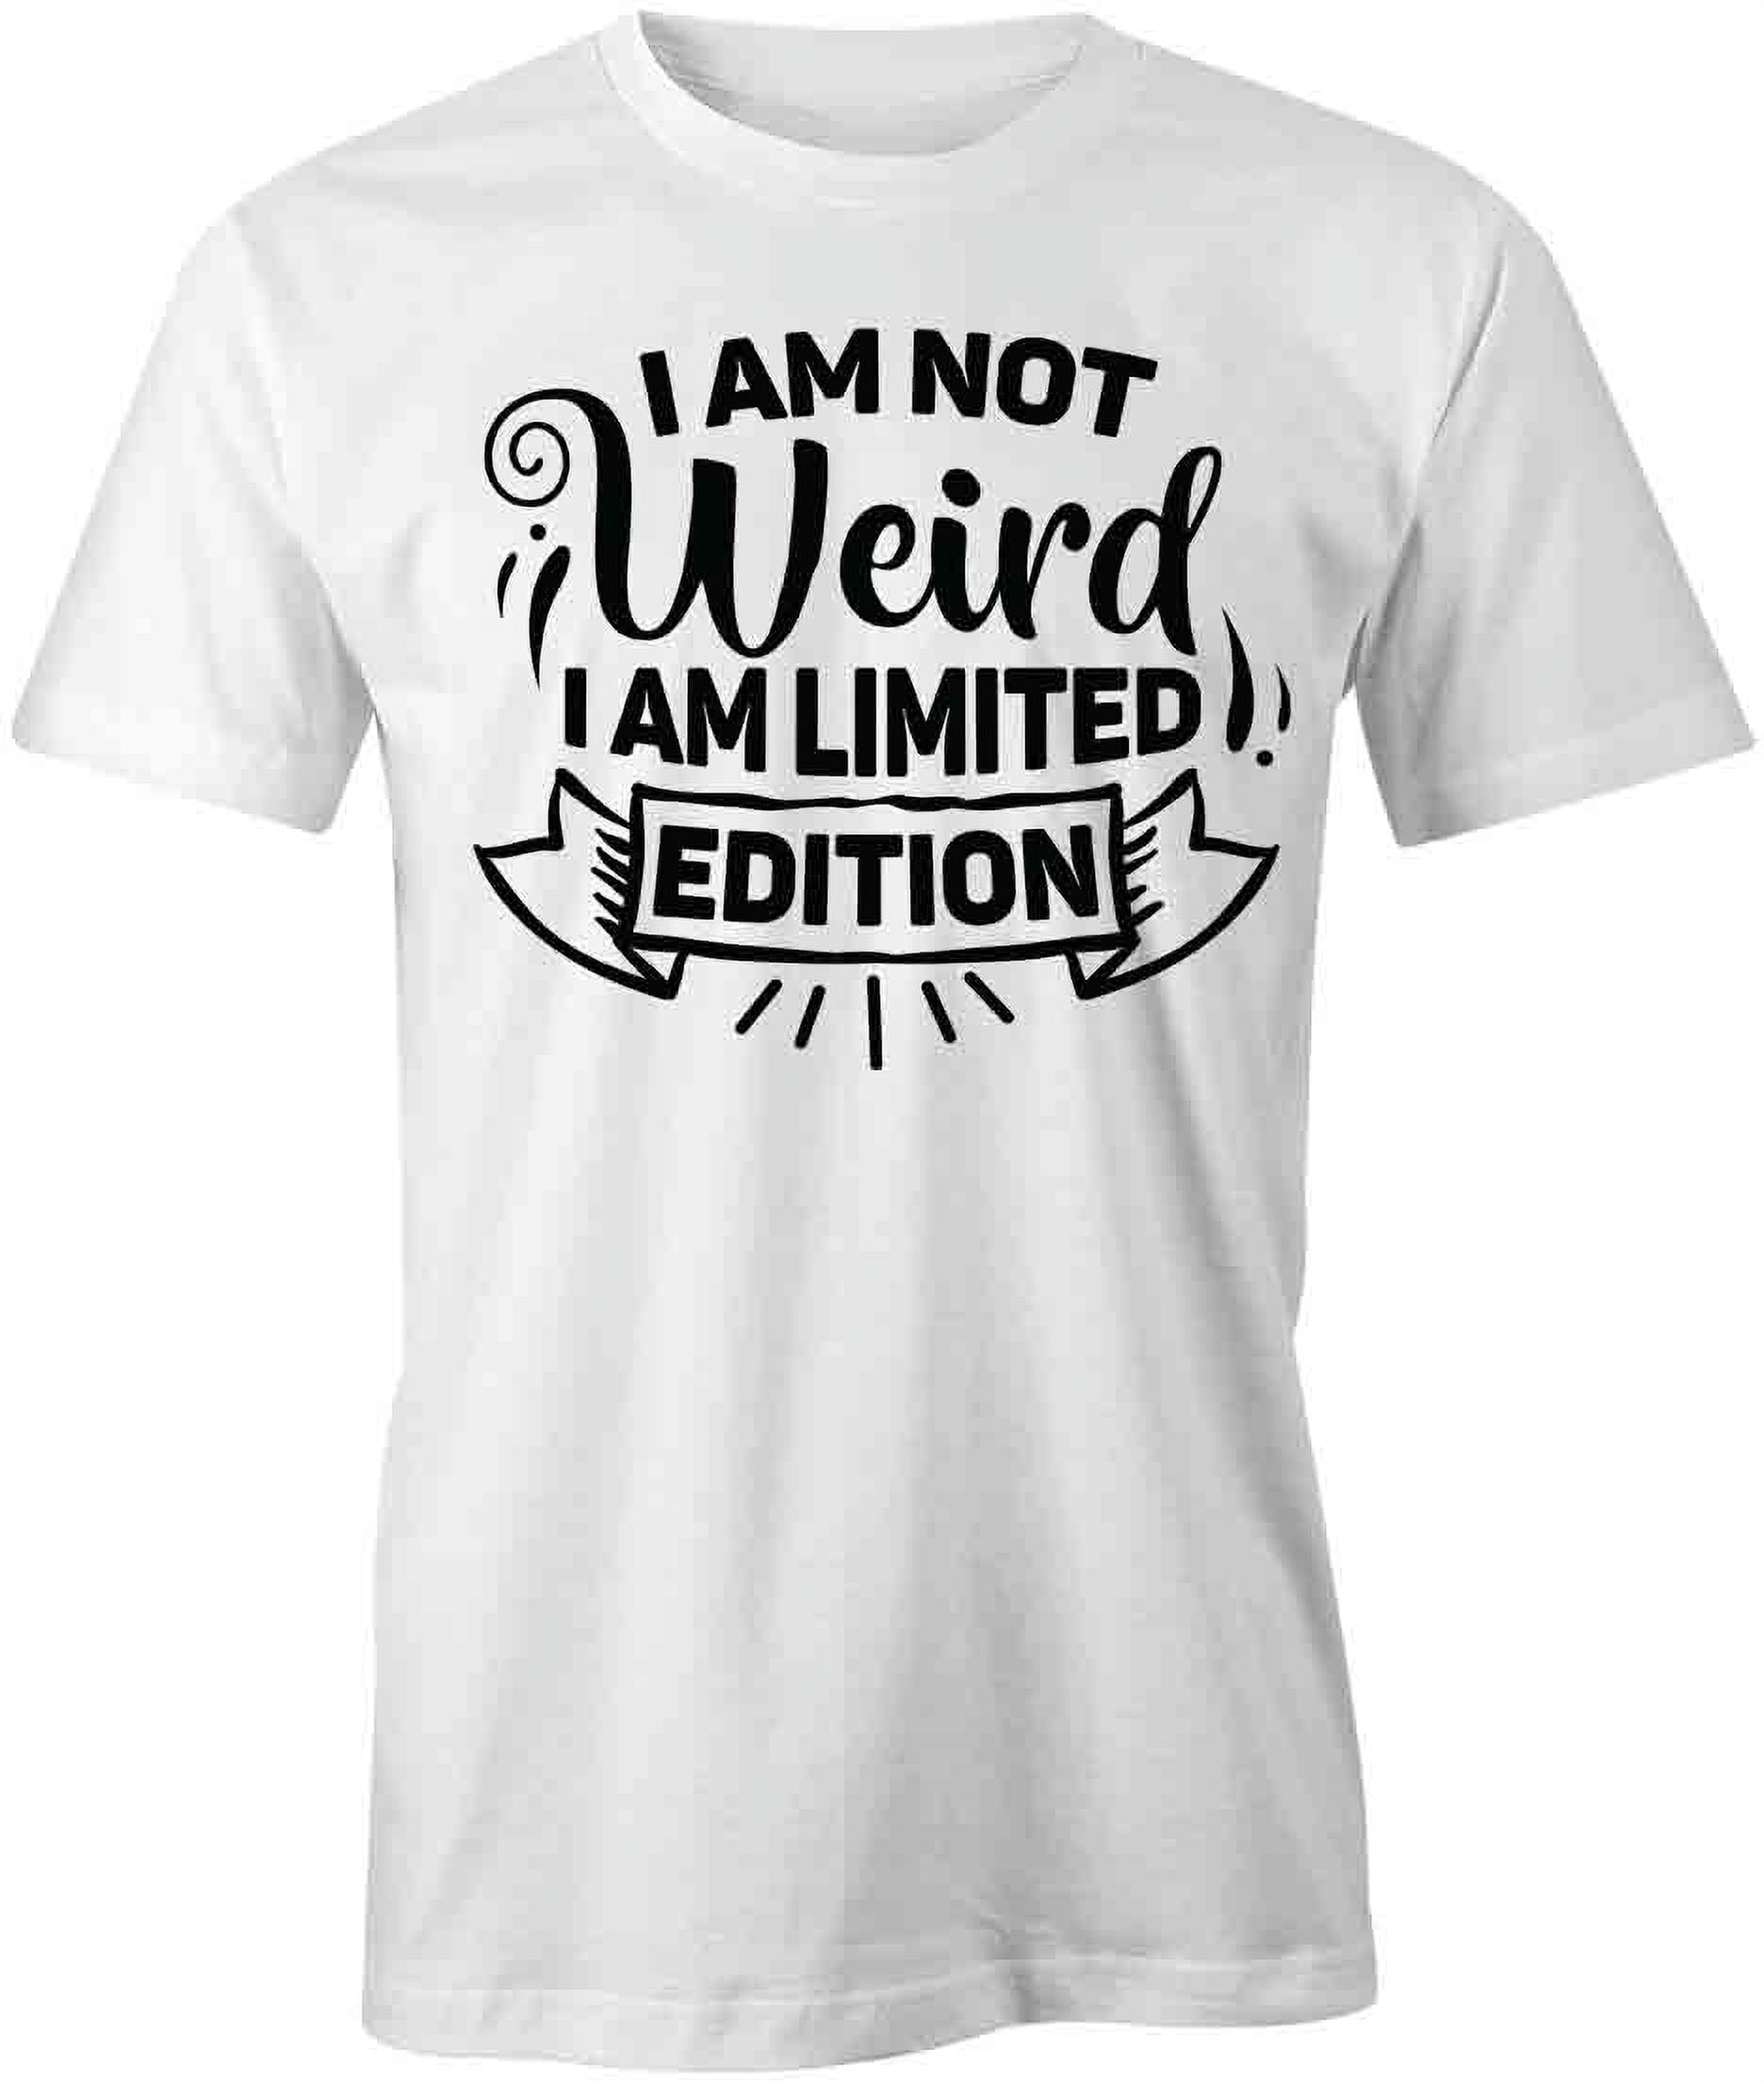 I'M NOT WEIRD I AM LIMITED EDITION Ego Confidence New Ladies Womens T-Shirt Top 